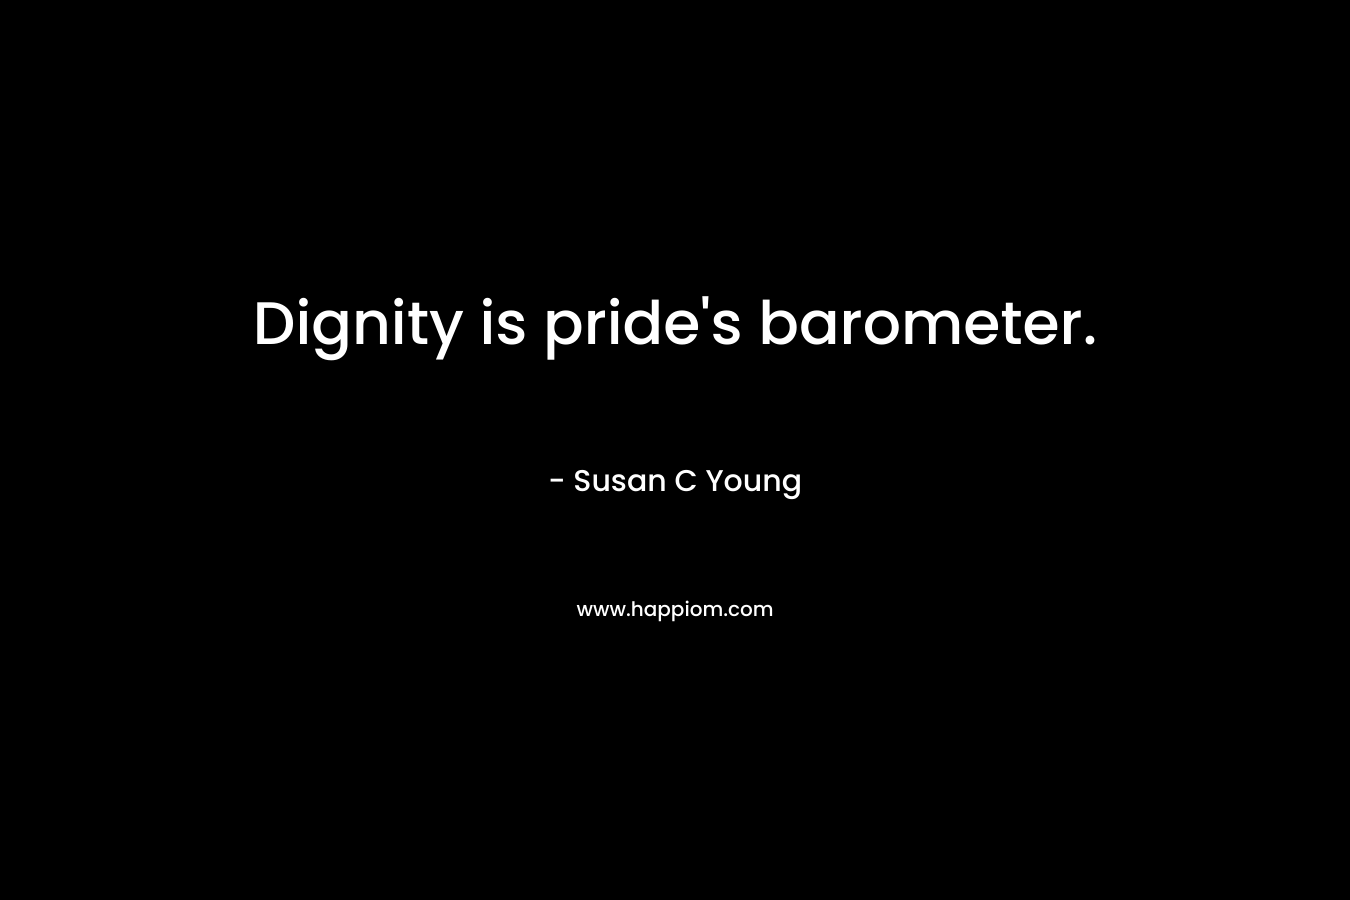 Dignity is pride’s barometer. – Susan C Young